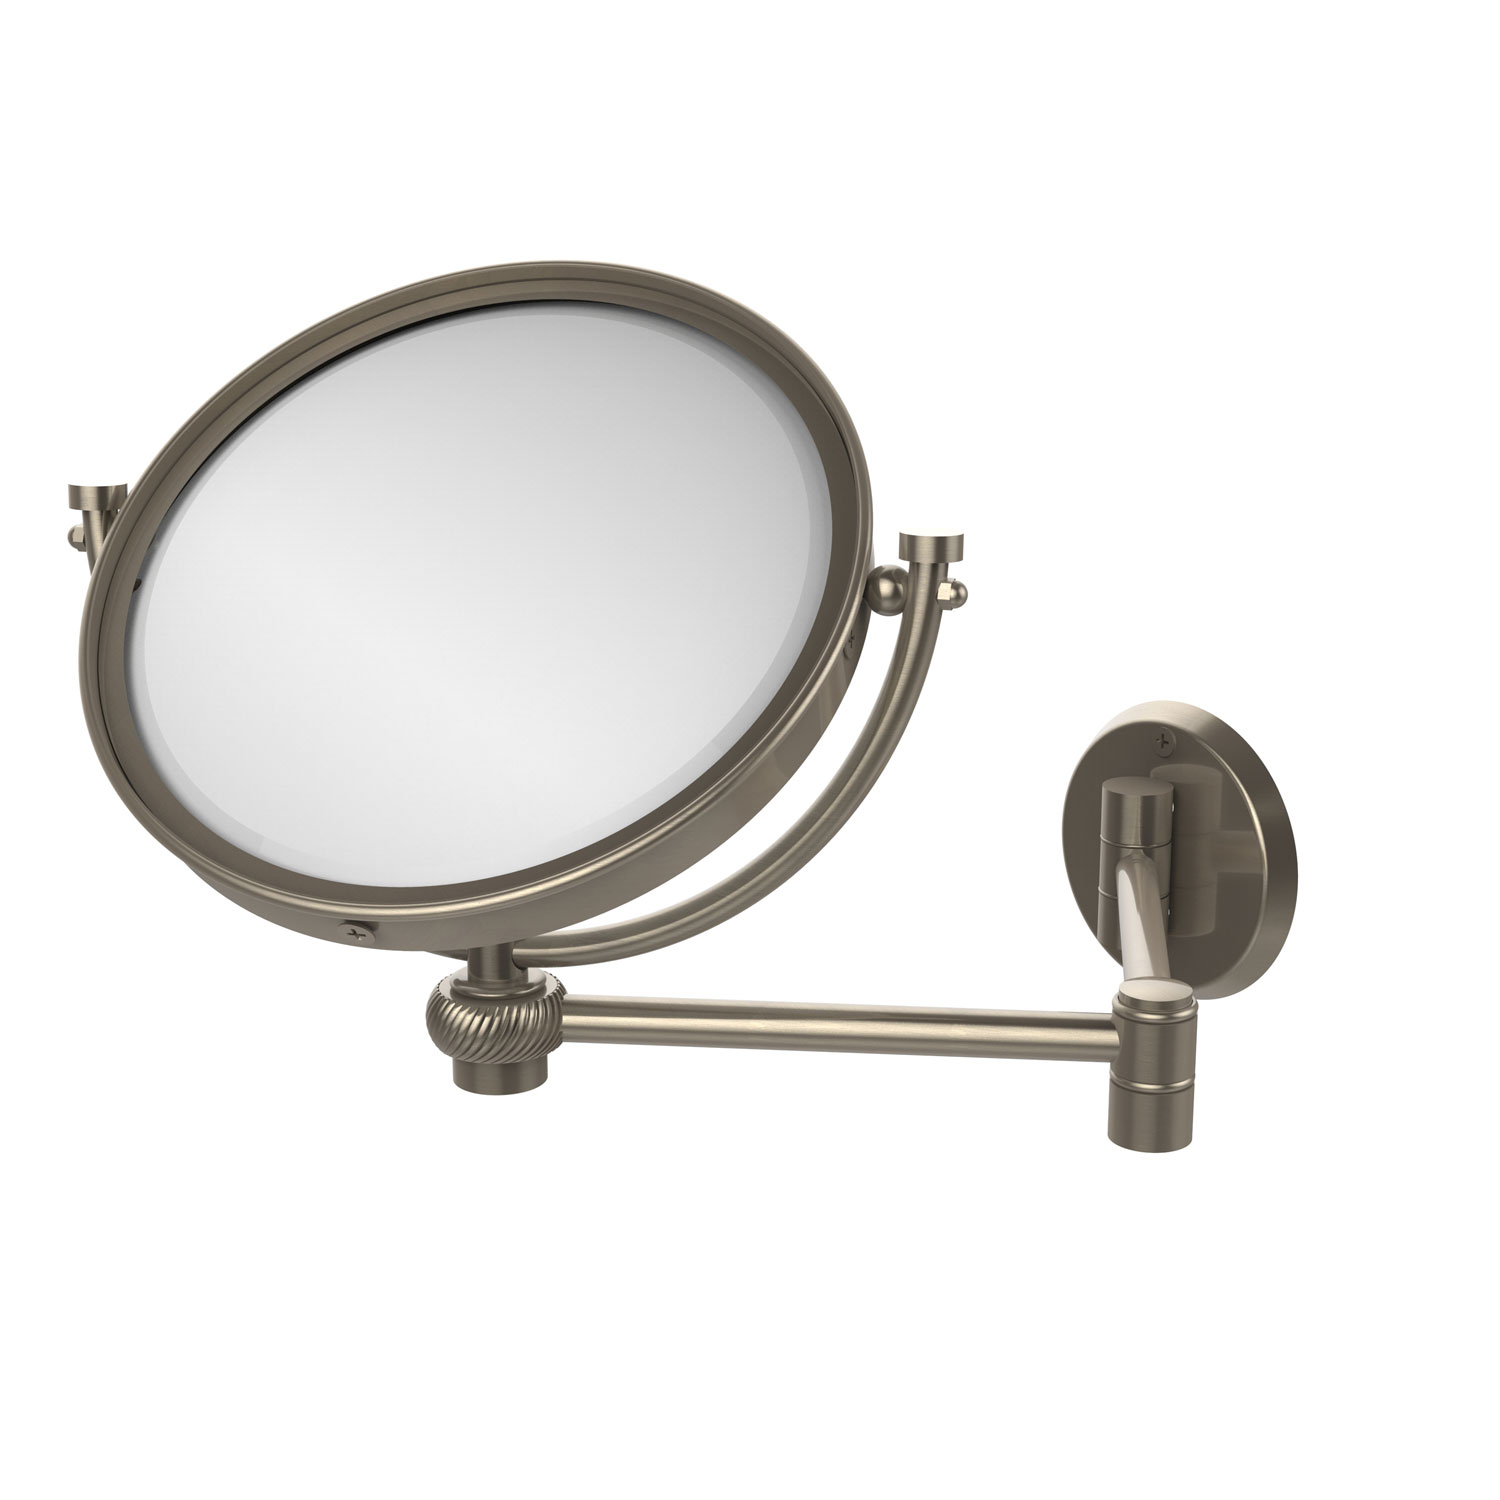 8 Inch Wall Mounted Extending Make-Up Mirror 2X Magnification With Twist Accent, Antique Pewter